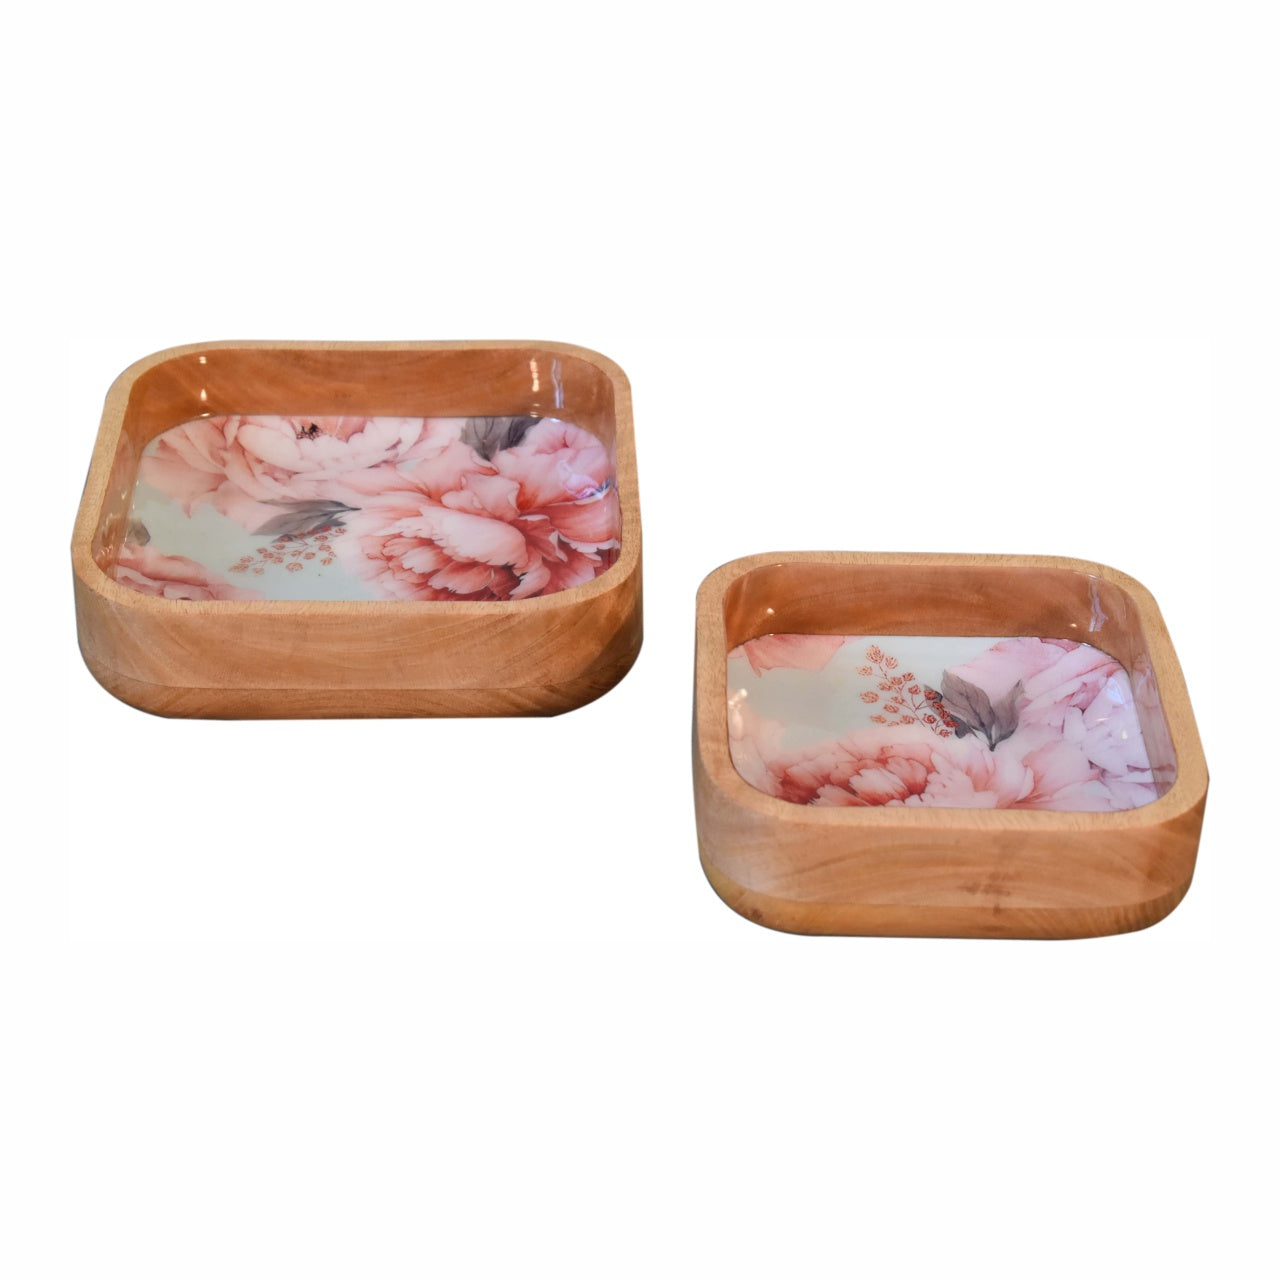 View Pink Floral Square Bowl Set of 2 information